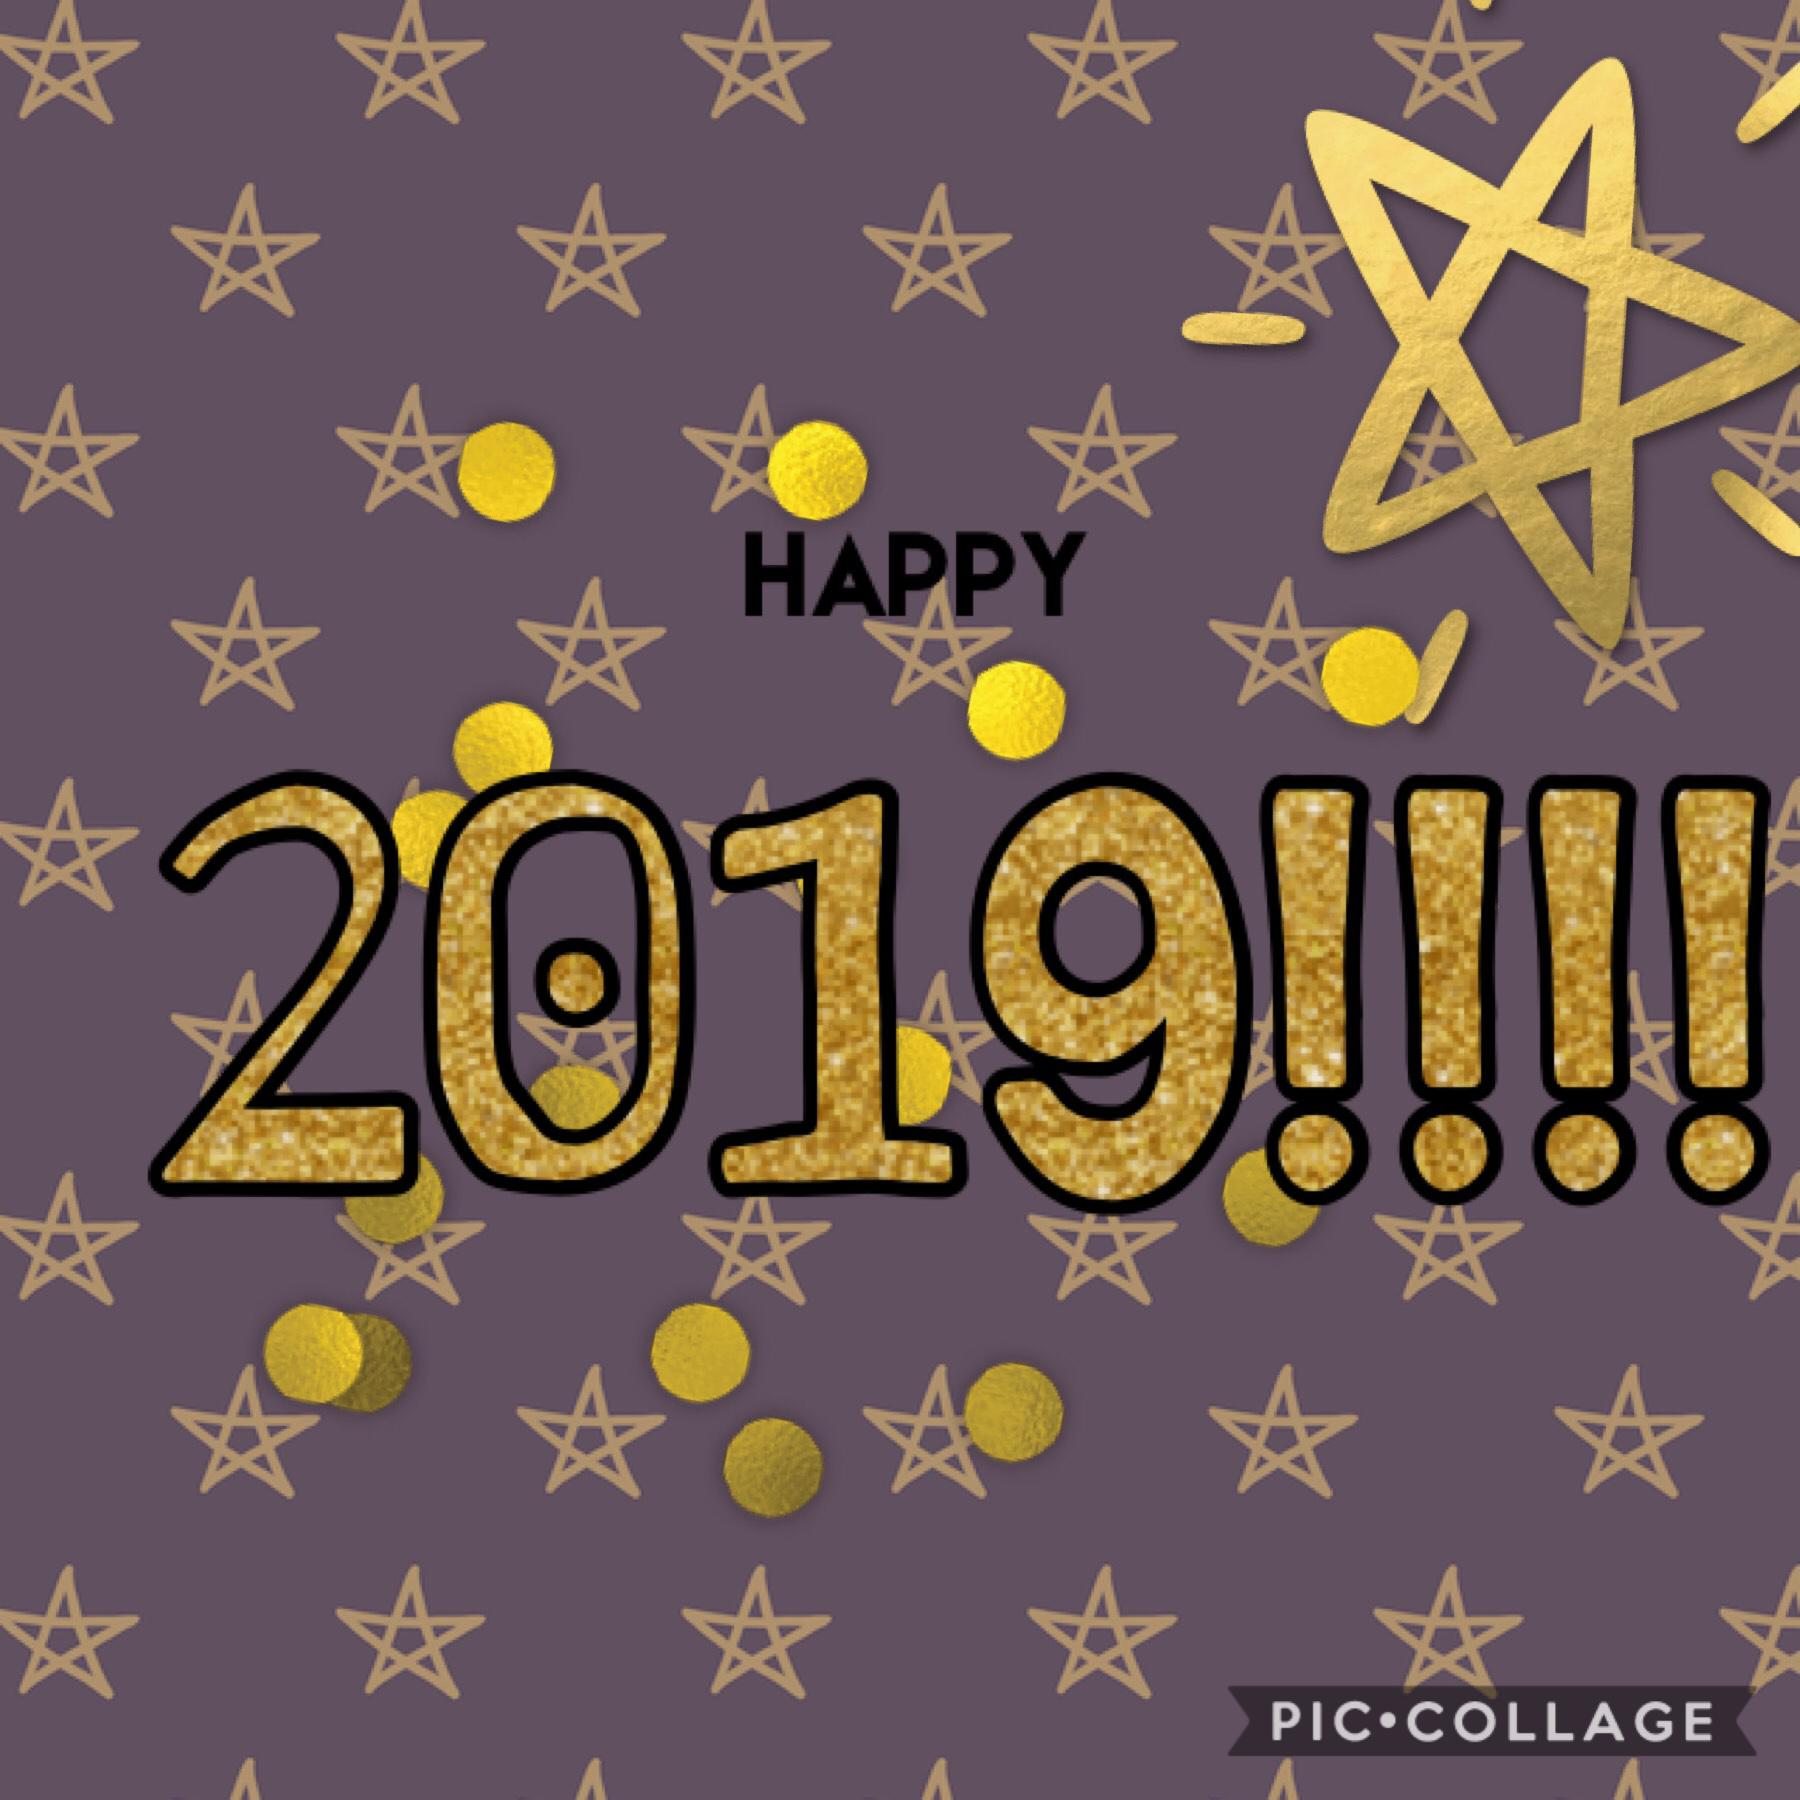 🥳🤩Tapper Tappies🤩🥳

Happy 2019!!!!!!! I’m so exited for this year, let’s hope it a good one 😛😛